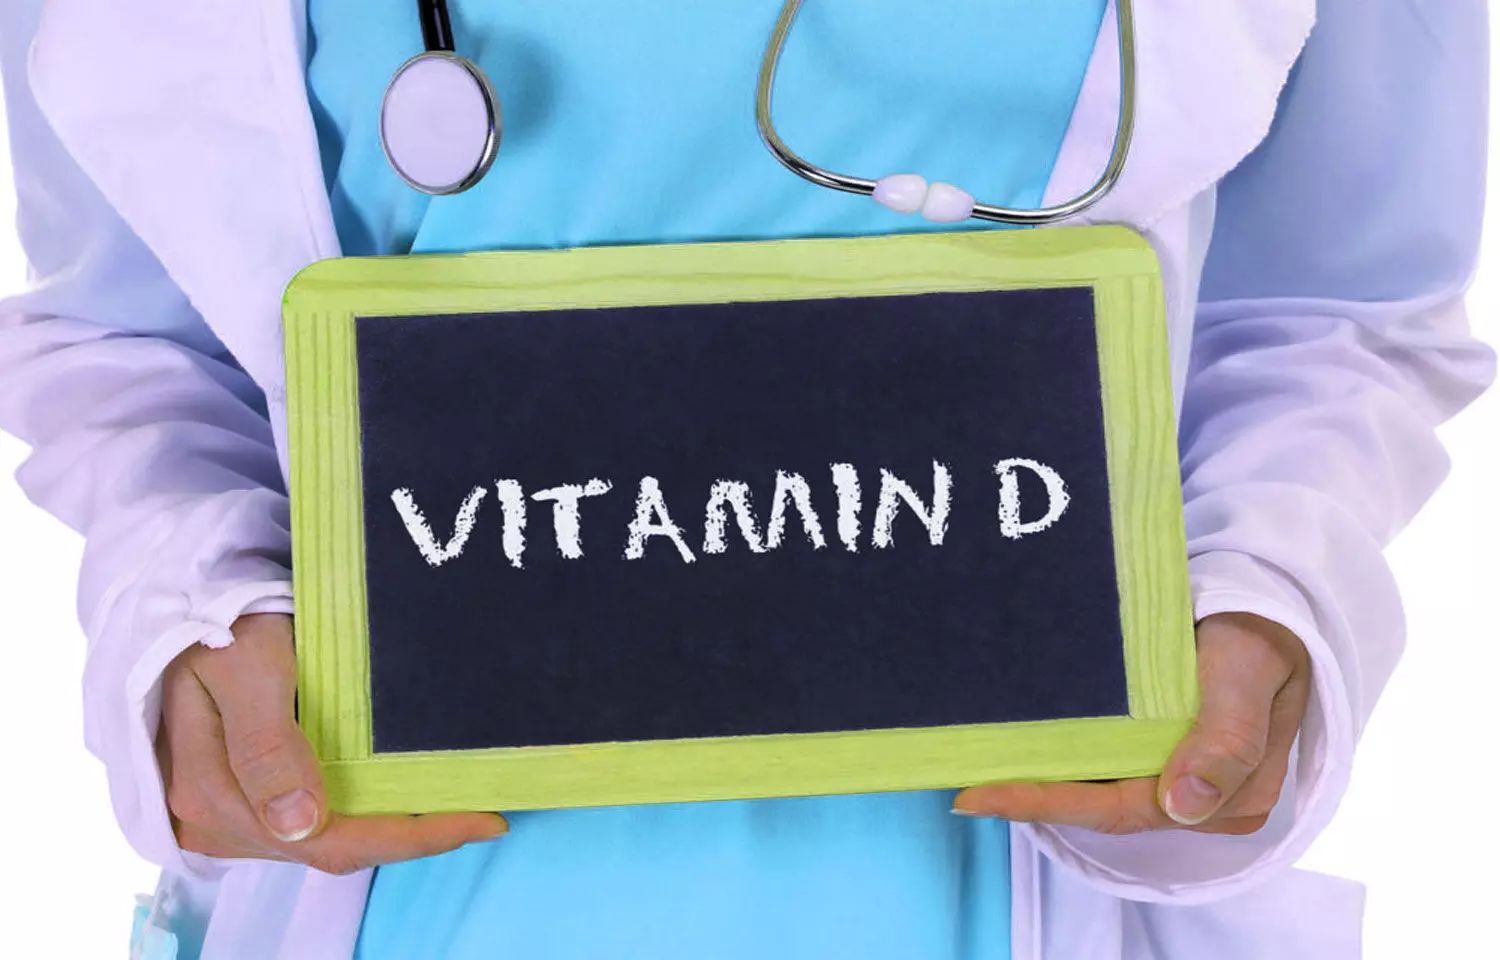 Low vitamin D status may increase colorectal cancer risk in black women: Study